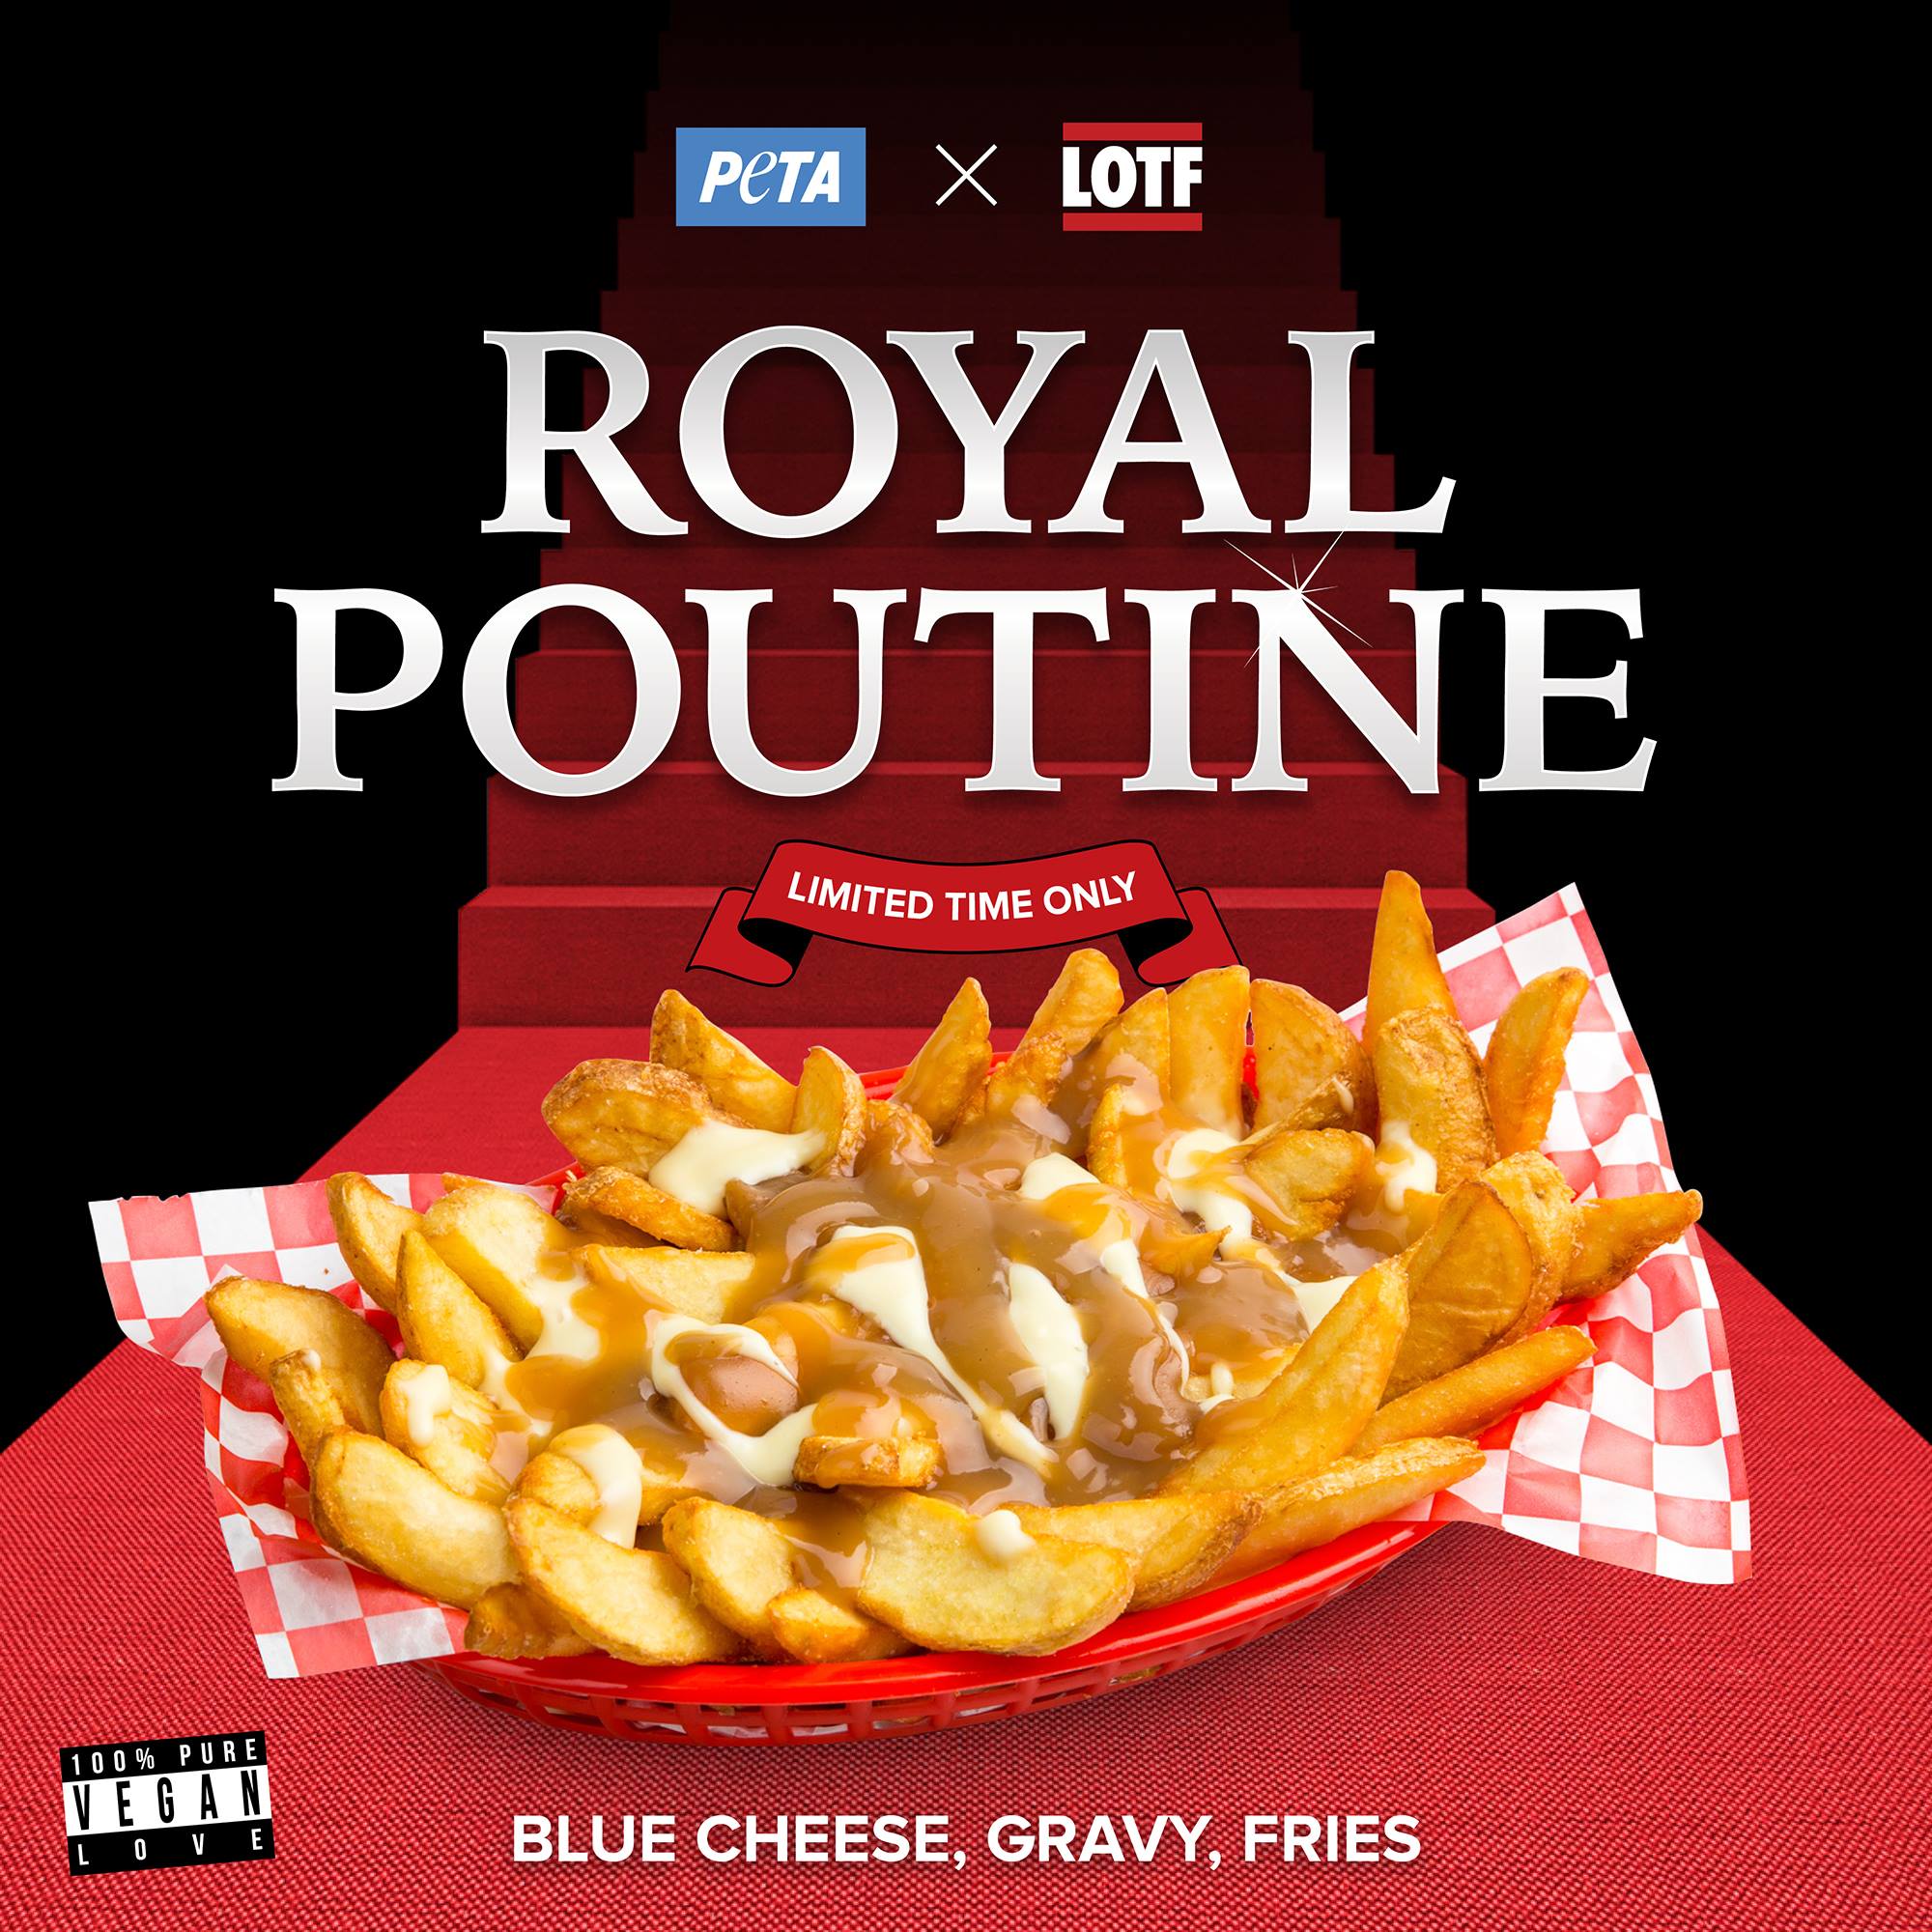 Vegan Royal Poutine Is Here, Just in Time for the Duchess